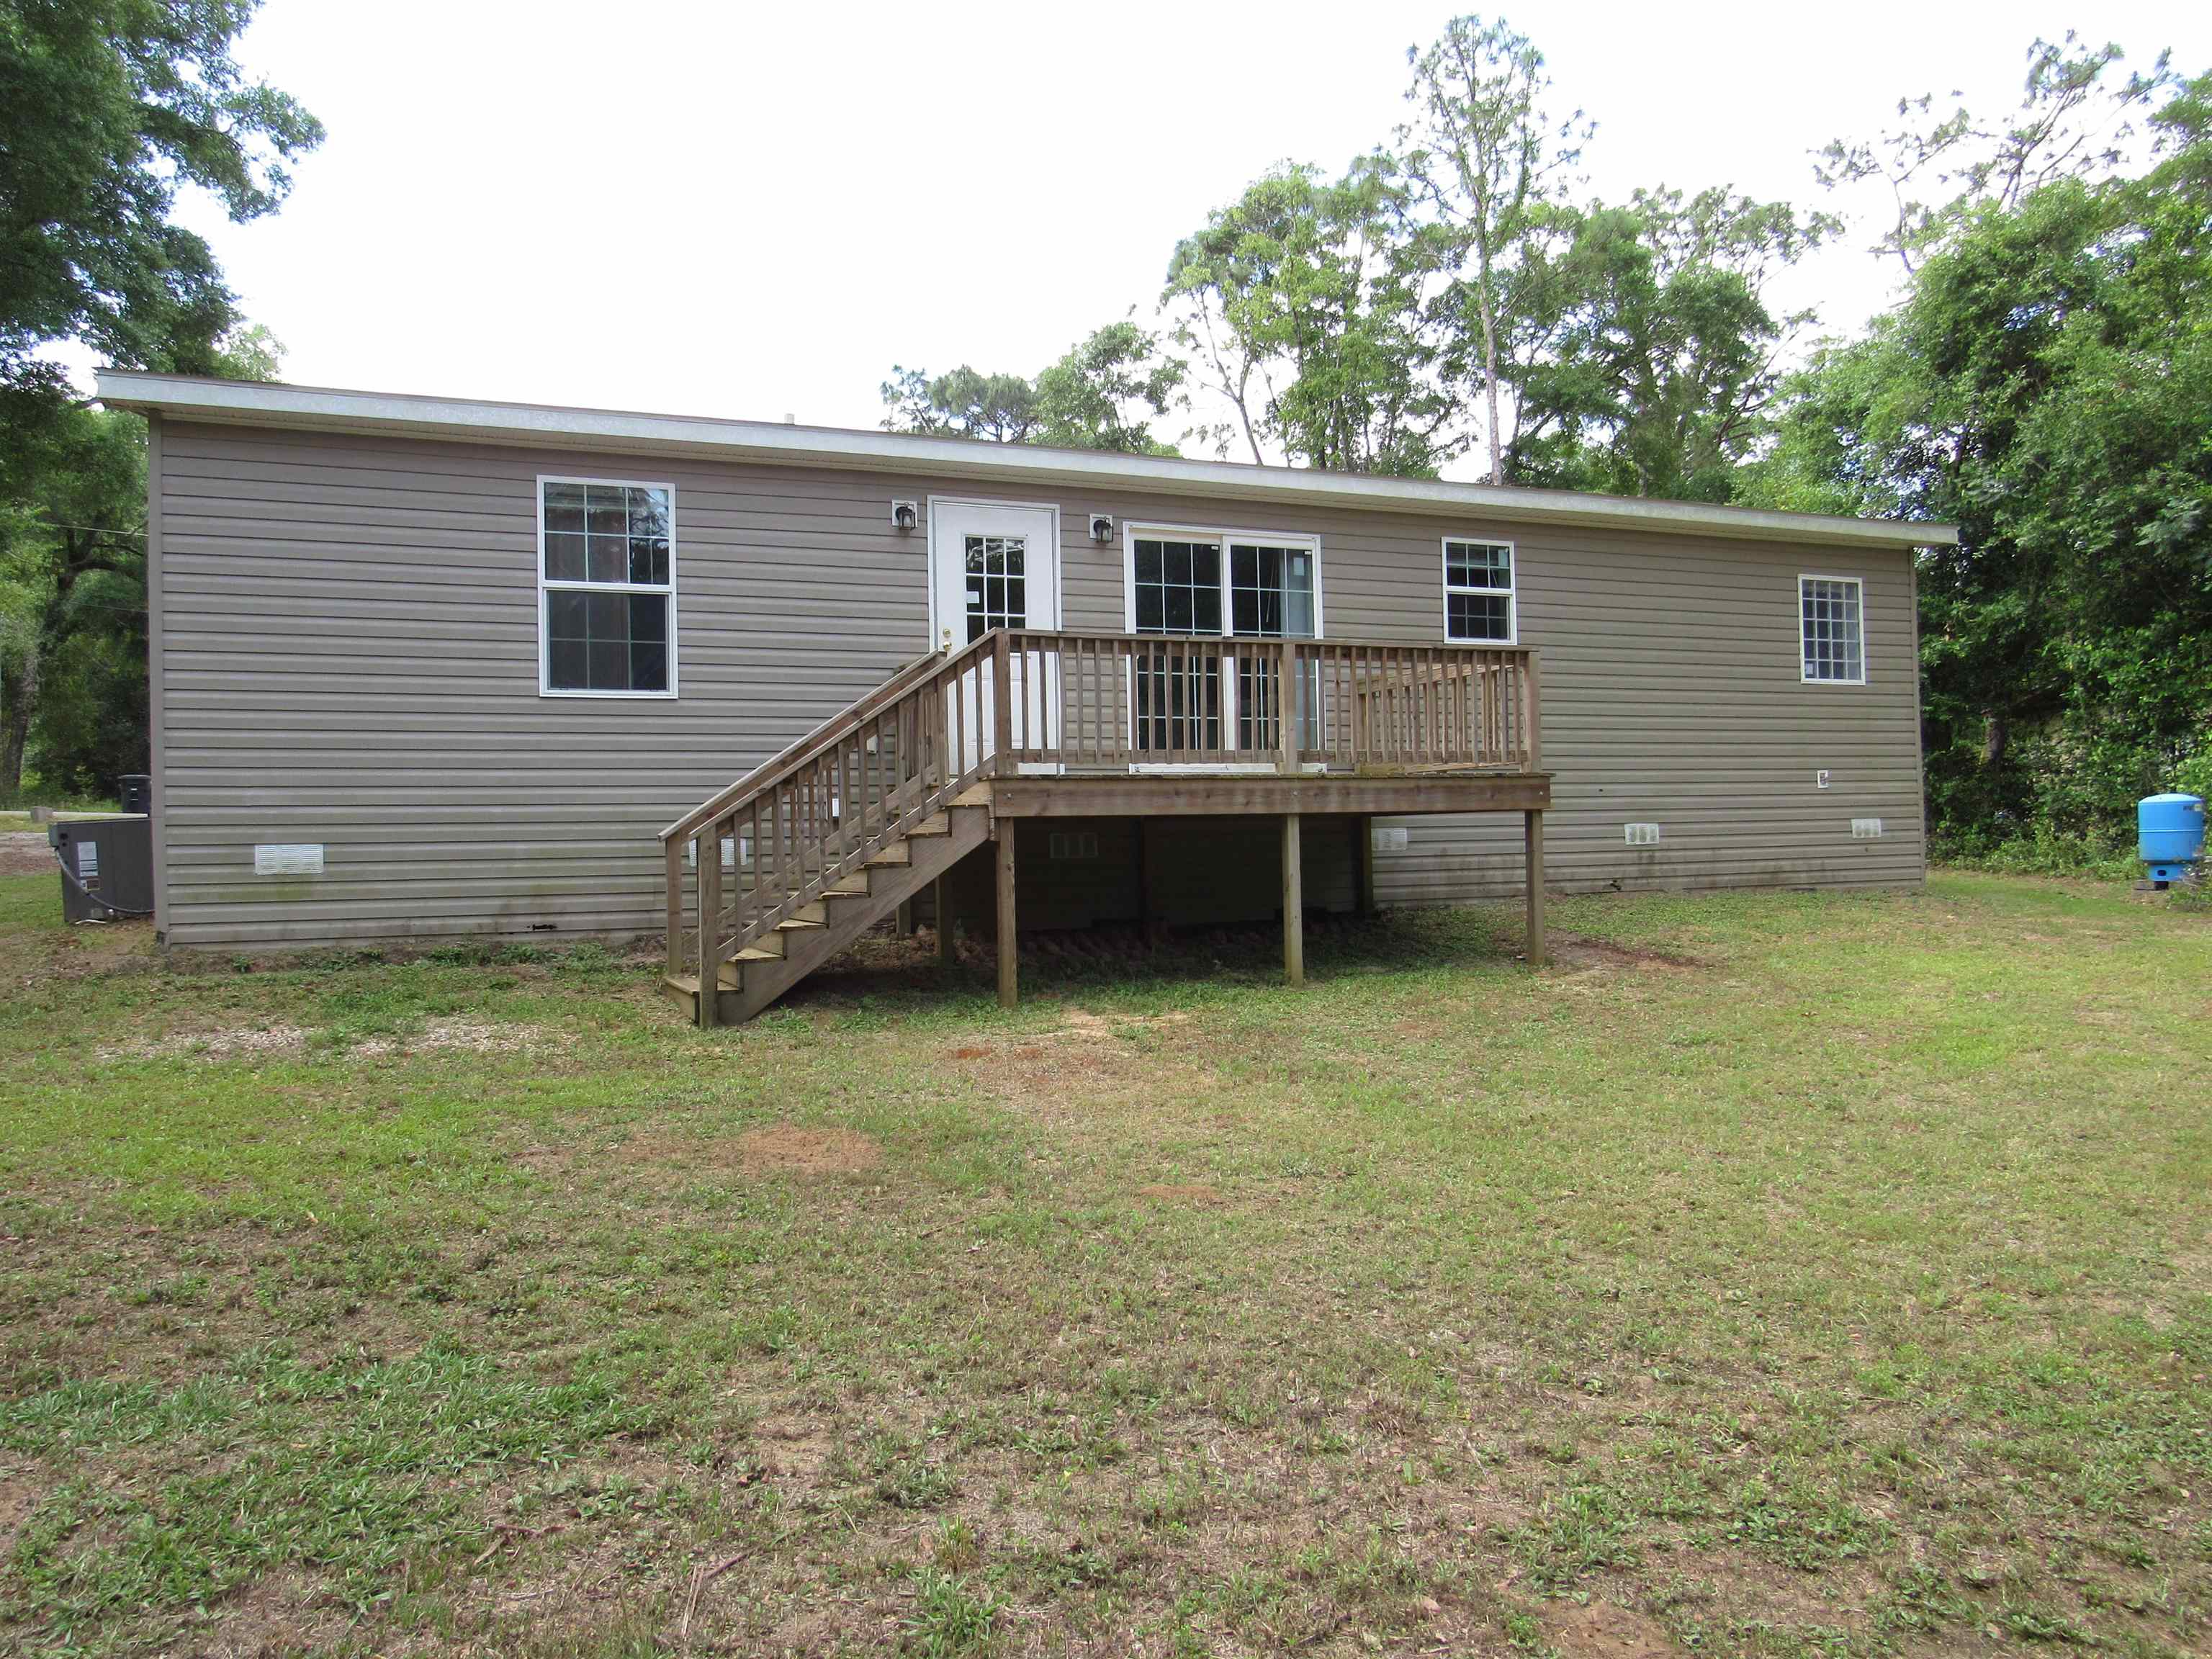 2954 Cathedral Drive,TALLAHASSEE,Florida 32310,3 Bedrooms Bedrooms,2 BathroomsBathrooms,Manuf/mobile home,2954 Cathedral Drive,358441